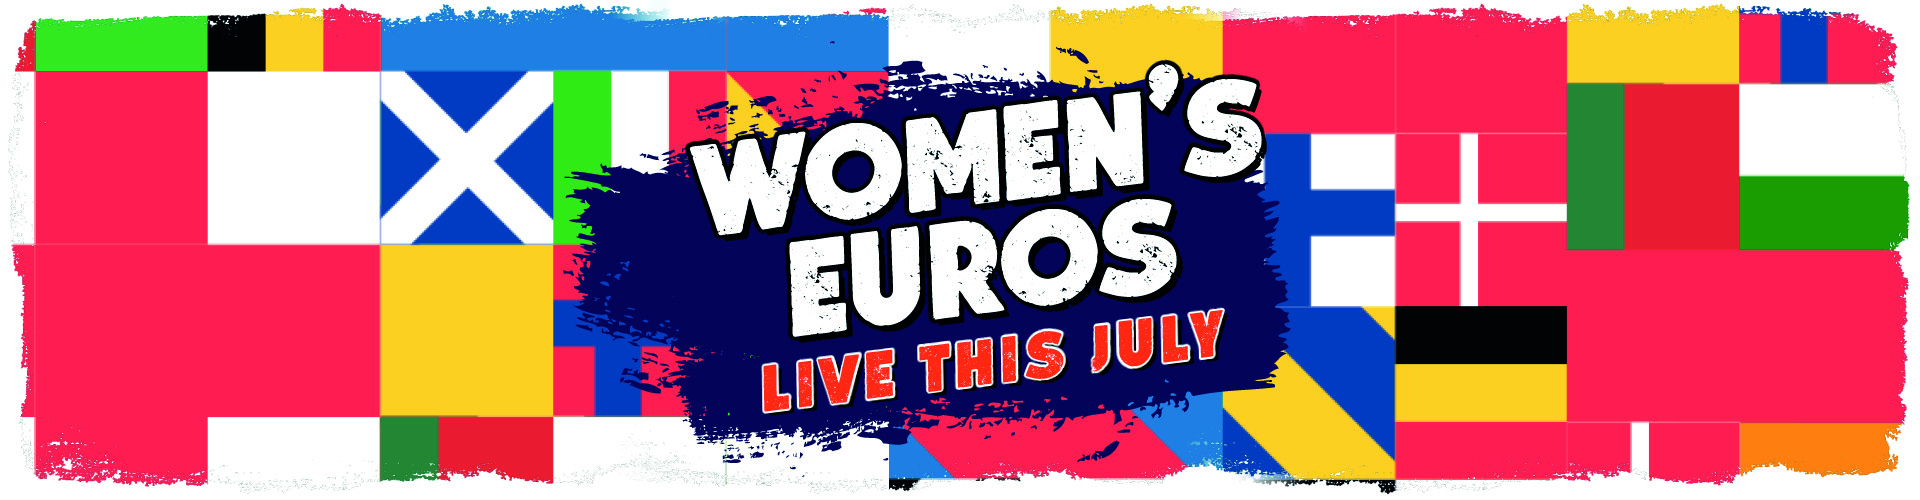 Women's EUROs - Live this July